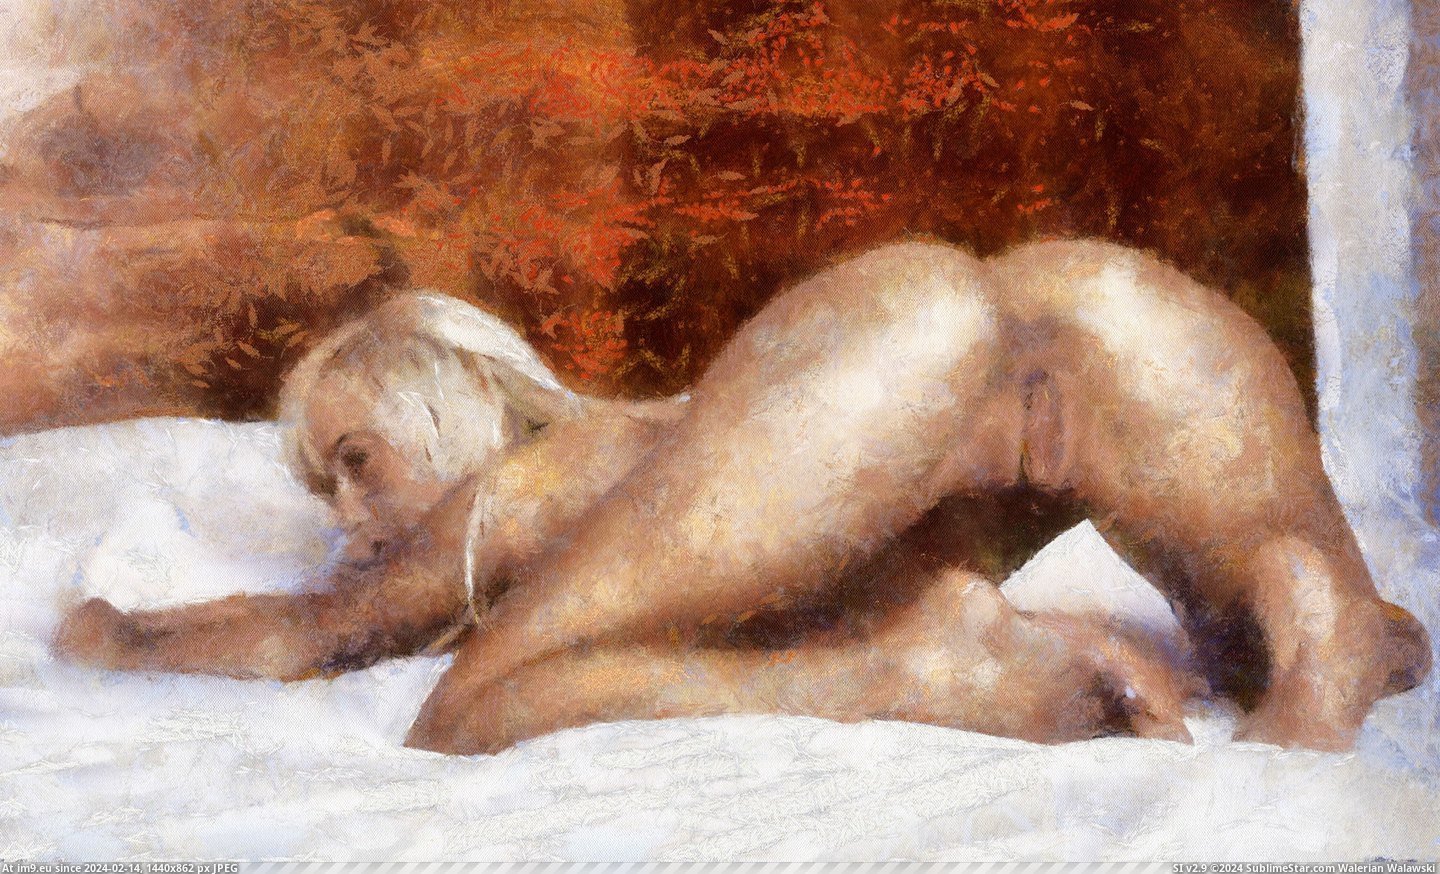  #Pussy  !pussy-_DAP_Benson Pic. (Image of album Adult fineart nude))